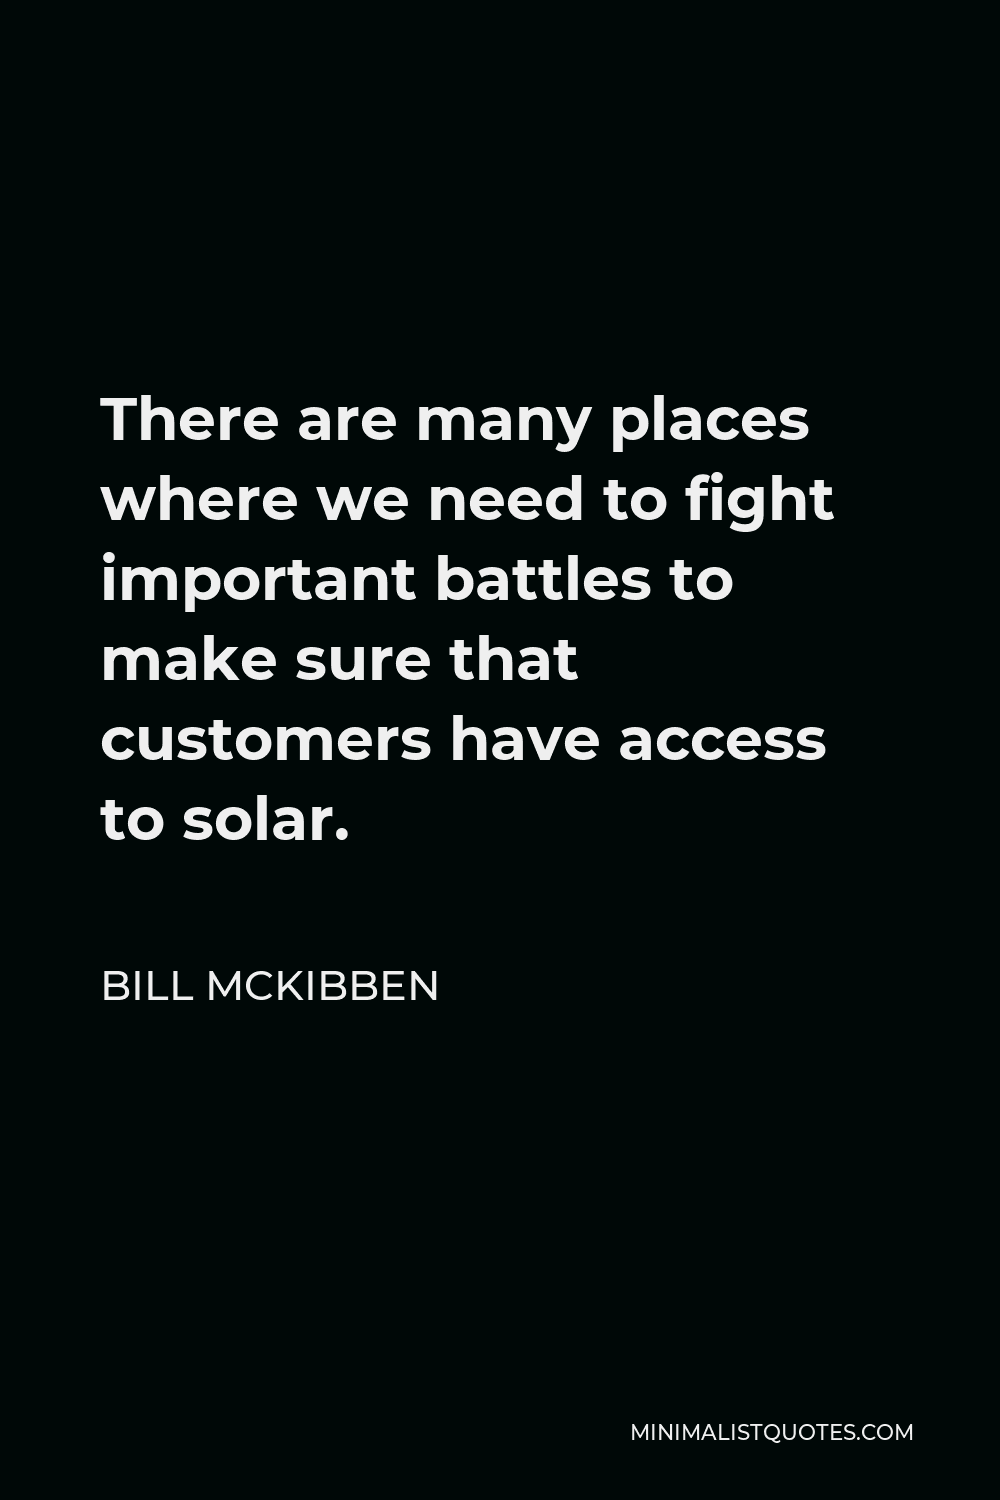 Bill McKibben Quote - There are many places where we need to fight important battles to make sure that customers have access to solar.